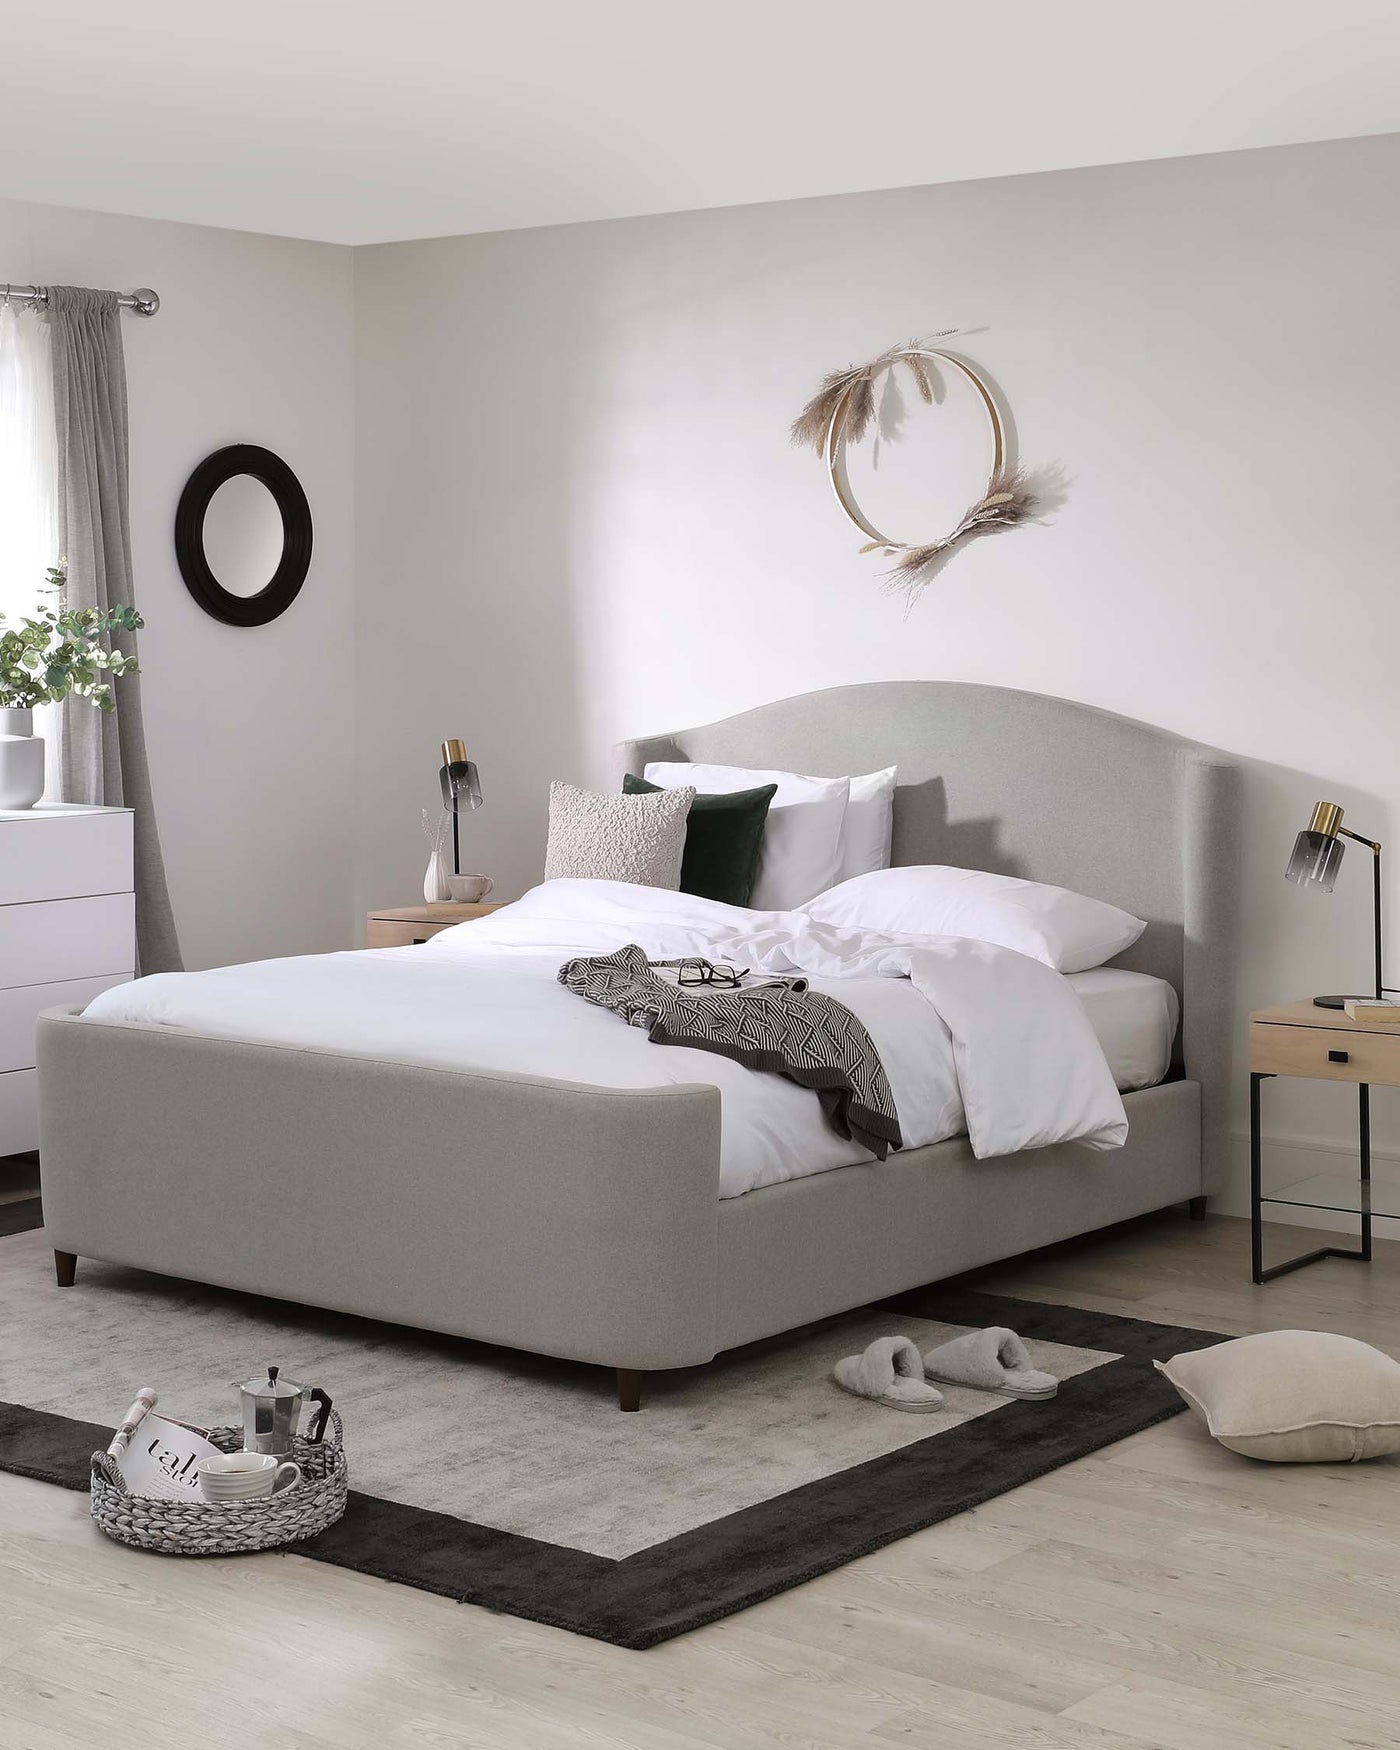 A modern bedroom showcasing a grey upholstered bed with a gently curved headboard and matching base, accompanied by a white two-drawer nightstand with slender legs on one side and a matching three-drawer chest on the other. Both pieces have minimalist knobs and a clean, sleek design.